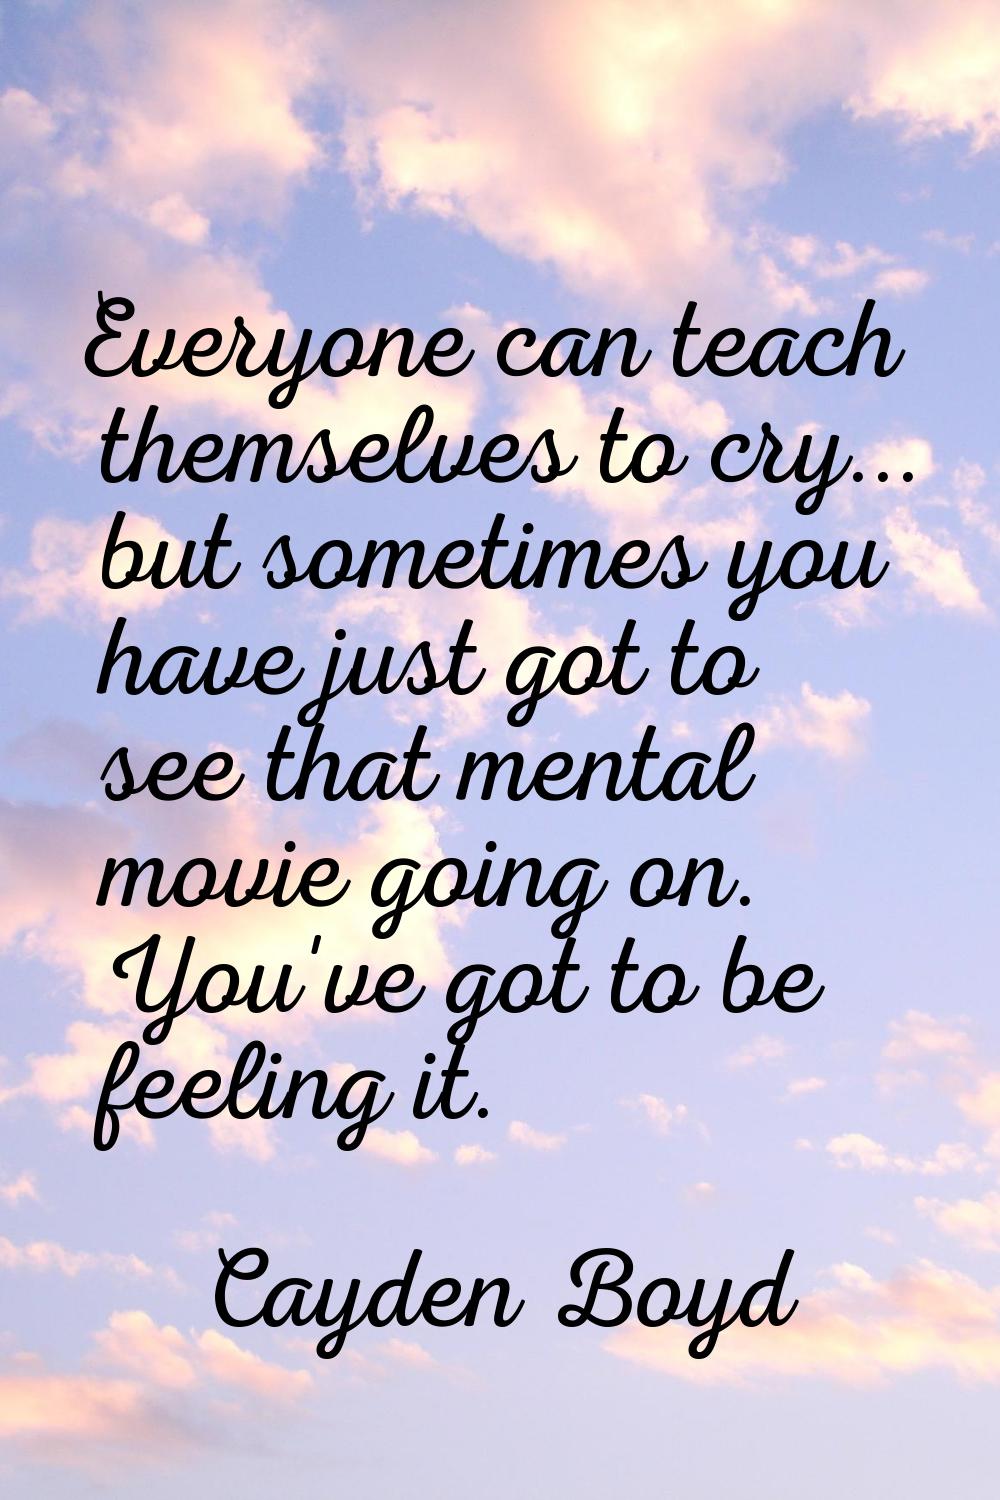 Everyone can teach themselves to cry... but sometimes you have just got to see that mental movie go